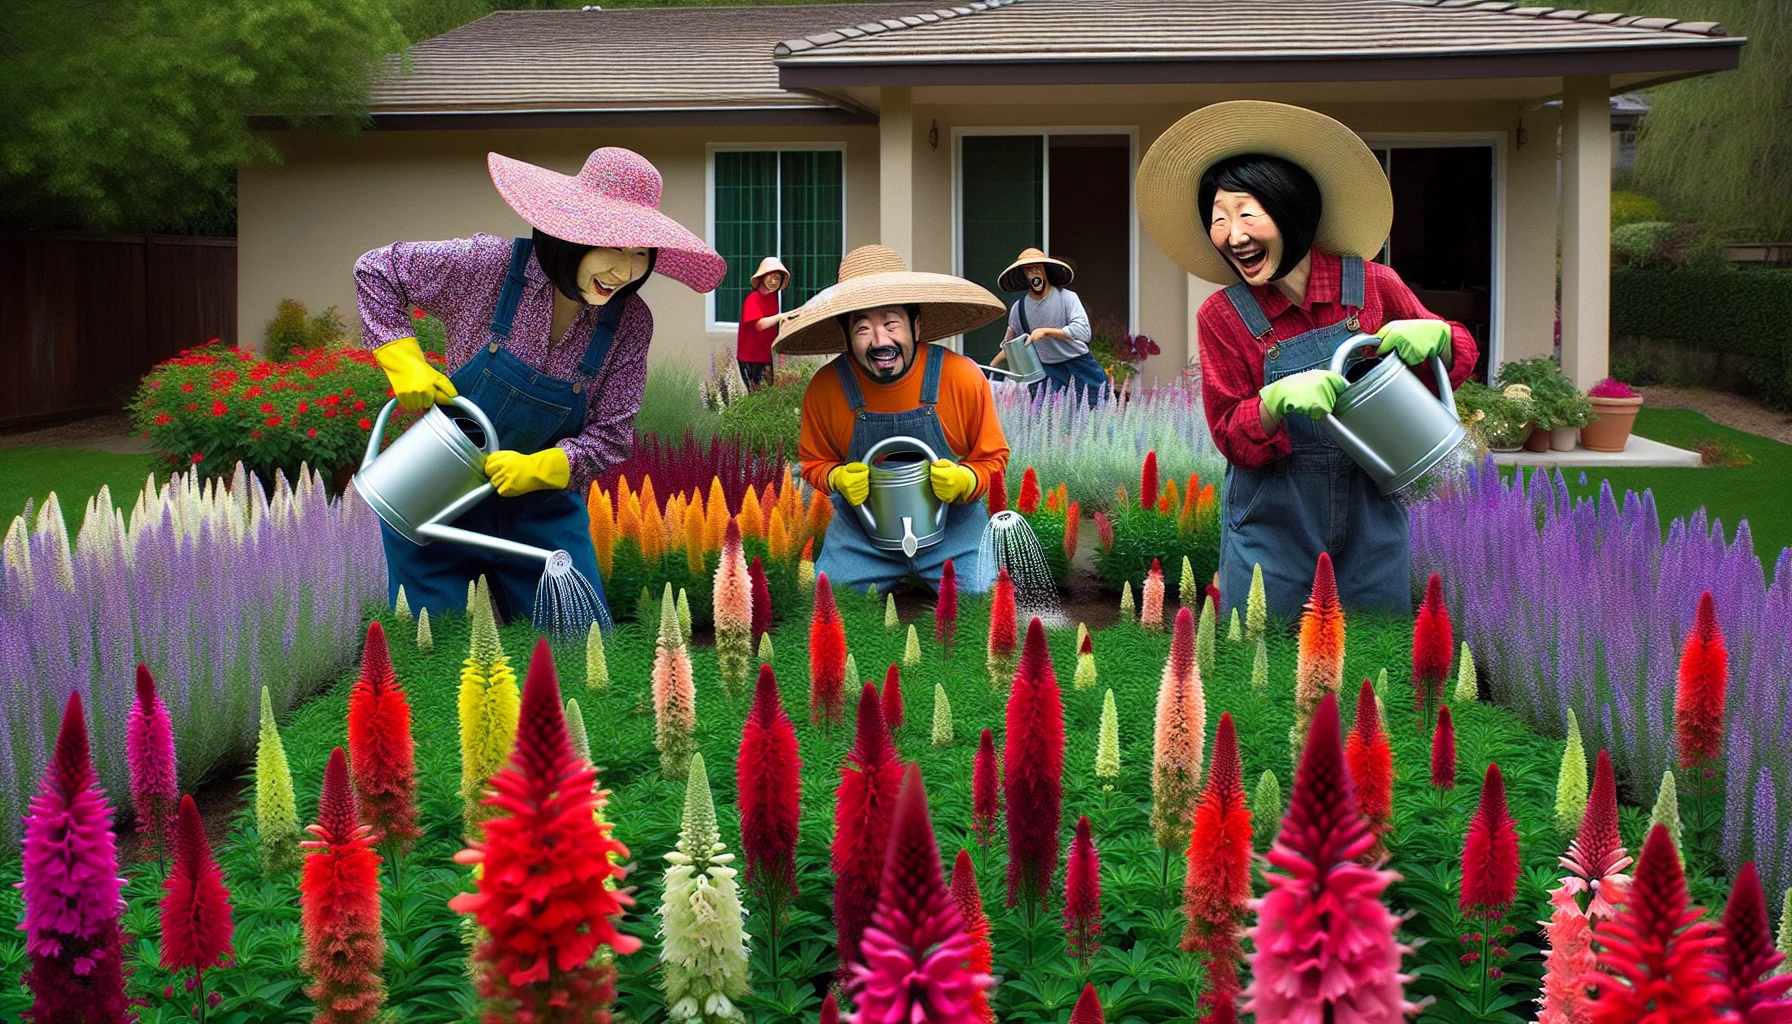 Create a captivating and humorous image revolving around gardening. The scene takes place in a home garden filled with vibrant, realistic salvia flowers, some blooming as annuals and others as perennials. It includes a couple of East Asian women and a South Asian man enthusiastically engaged in humorous gardening activities. Perhaps they are wearing oversized sun hats or misjudging the scale of their watering cans. Through this amusing gardening scenario, the image subtly prompts viewers to appreciate the joy and fun side of gardening.